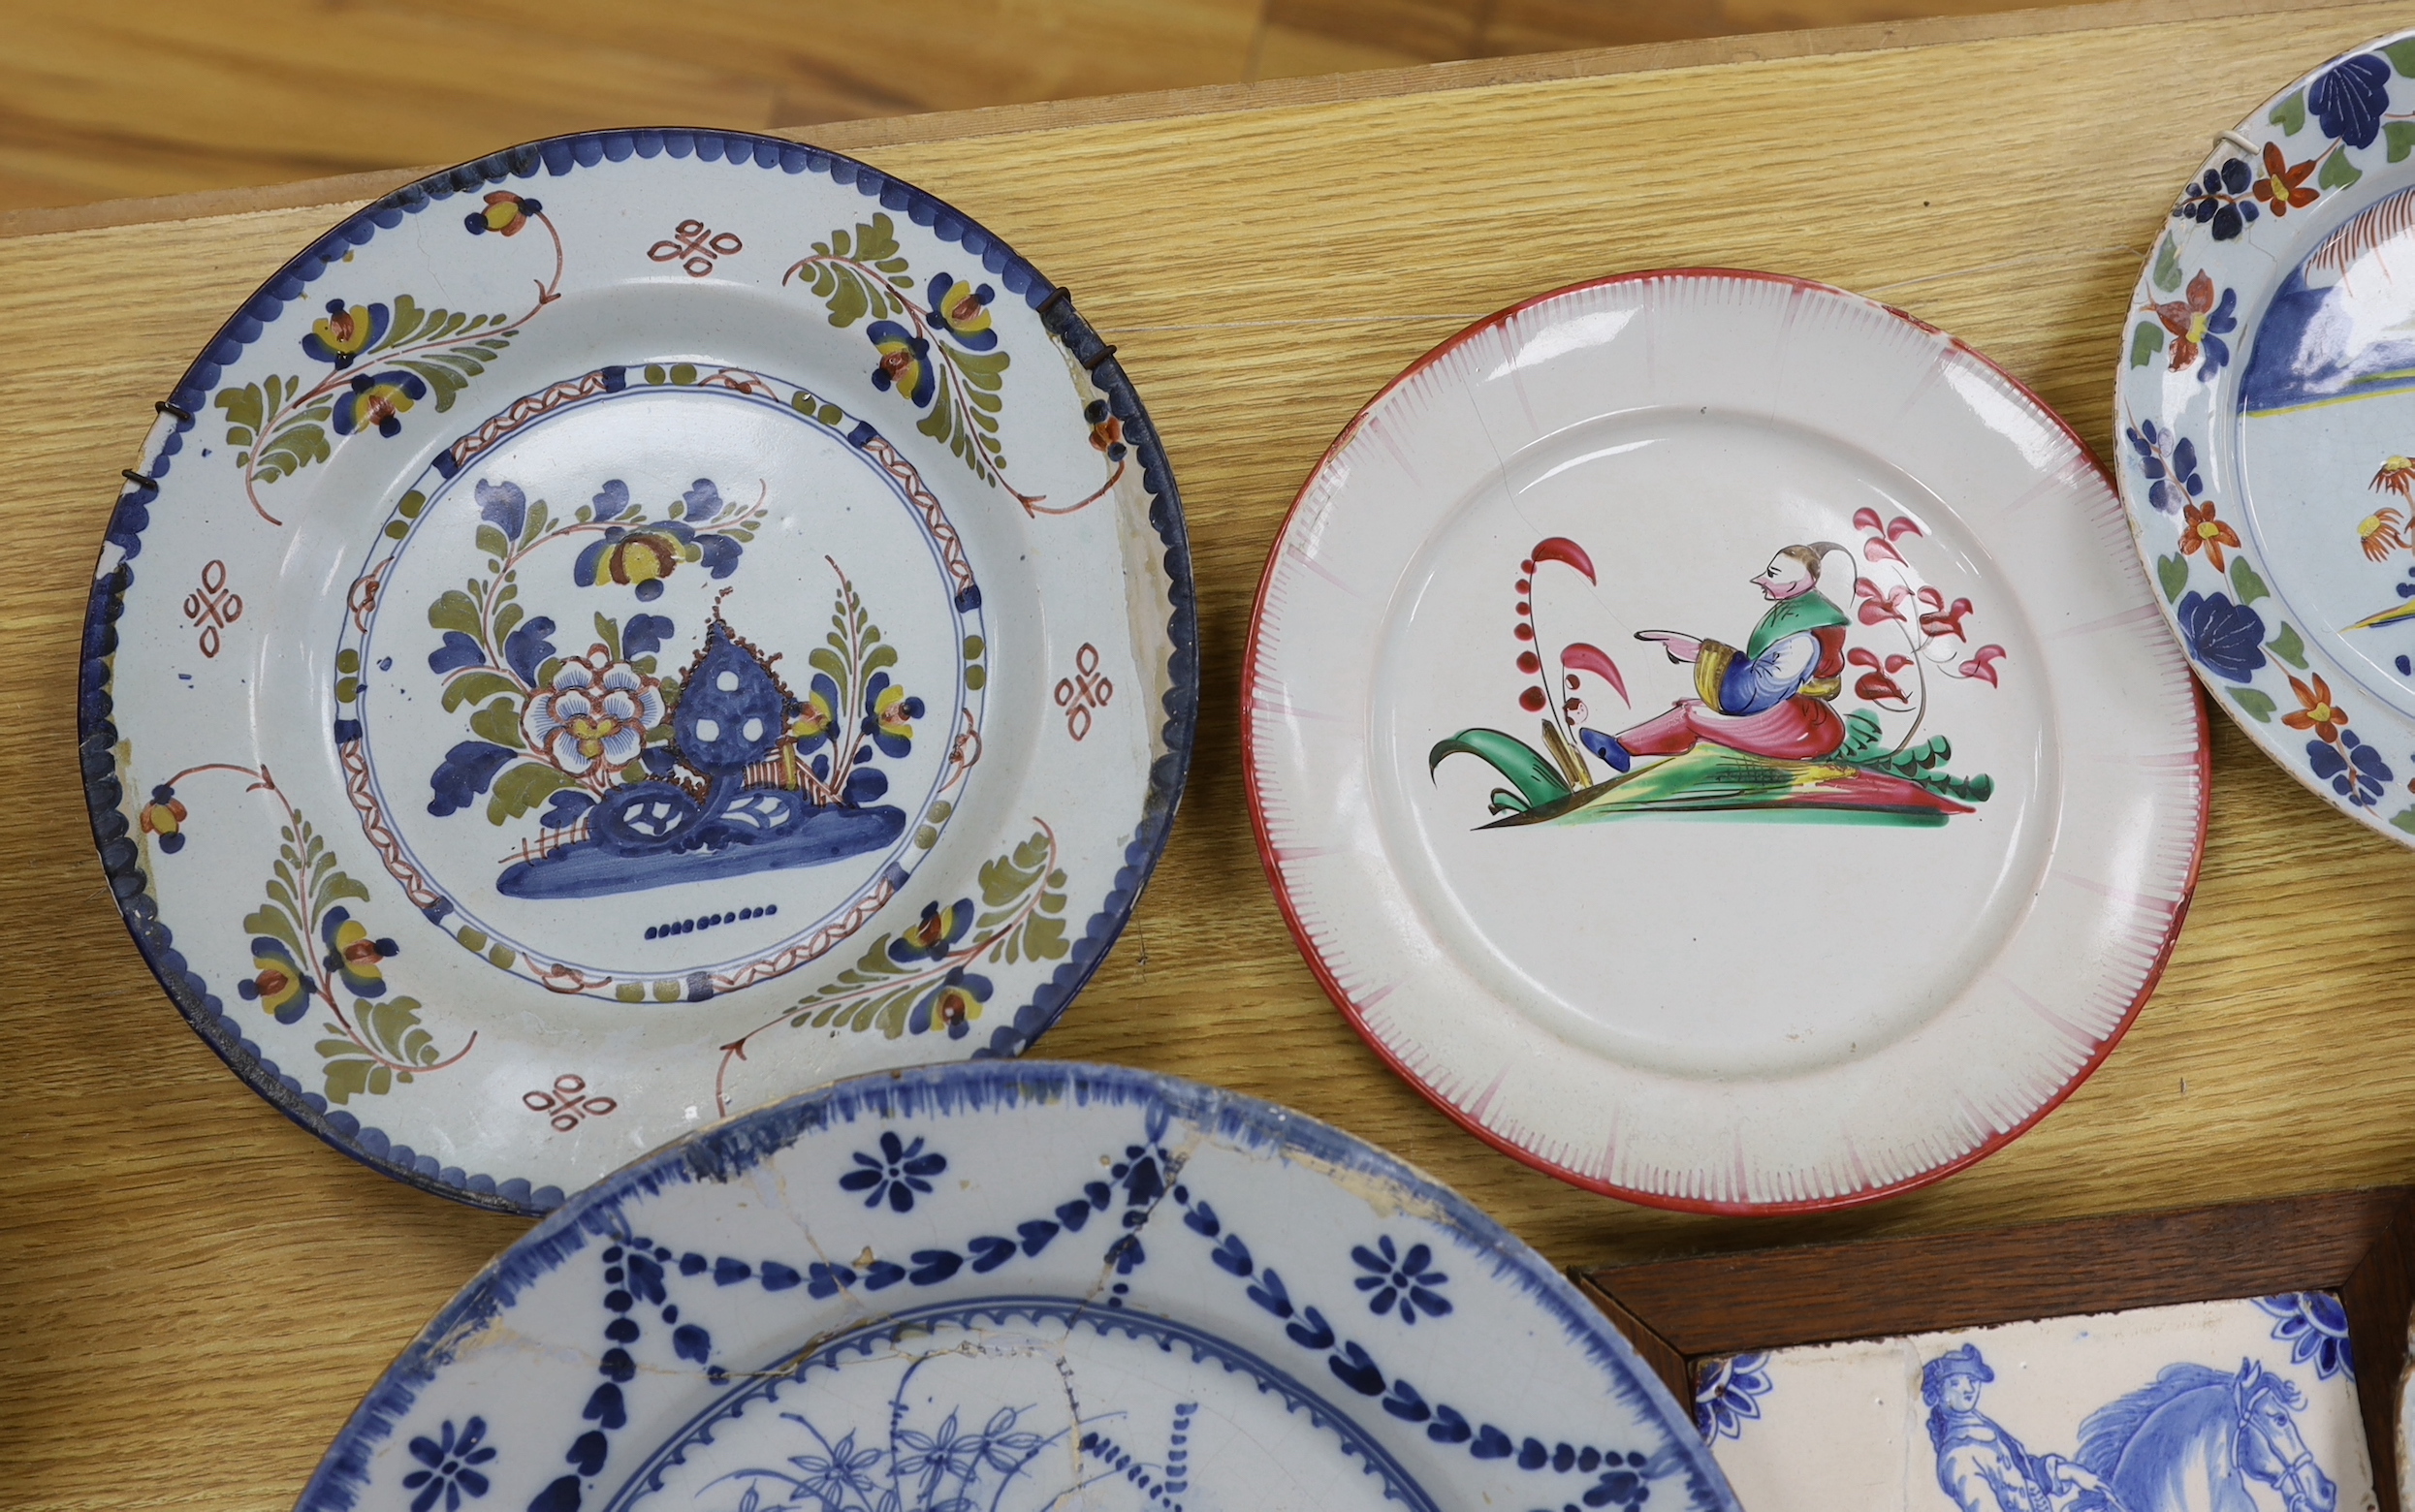 Two 18th century Delft blue and white dishes, a Delft polychrome dish, an English delftware plate, a - Image 2 of 4